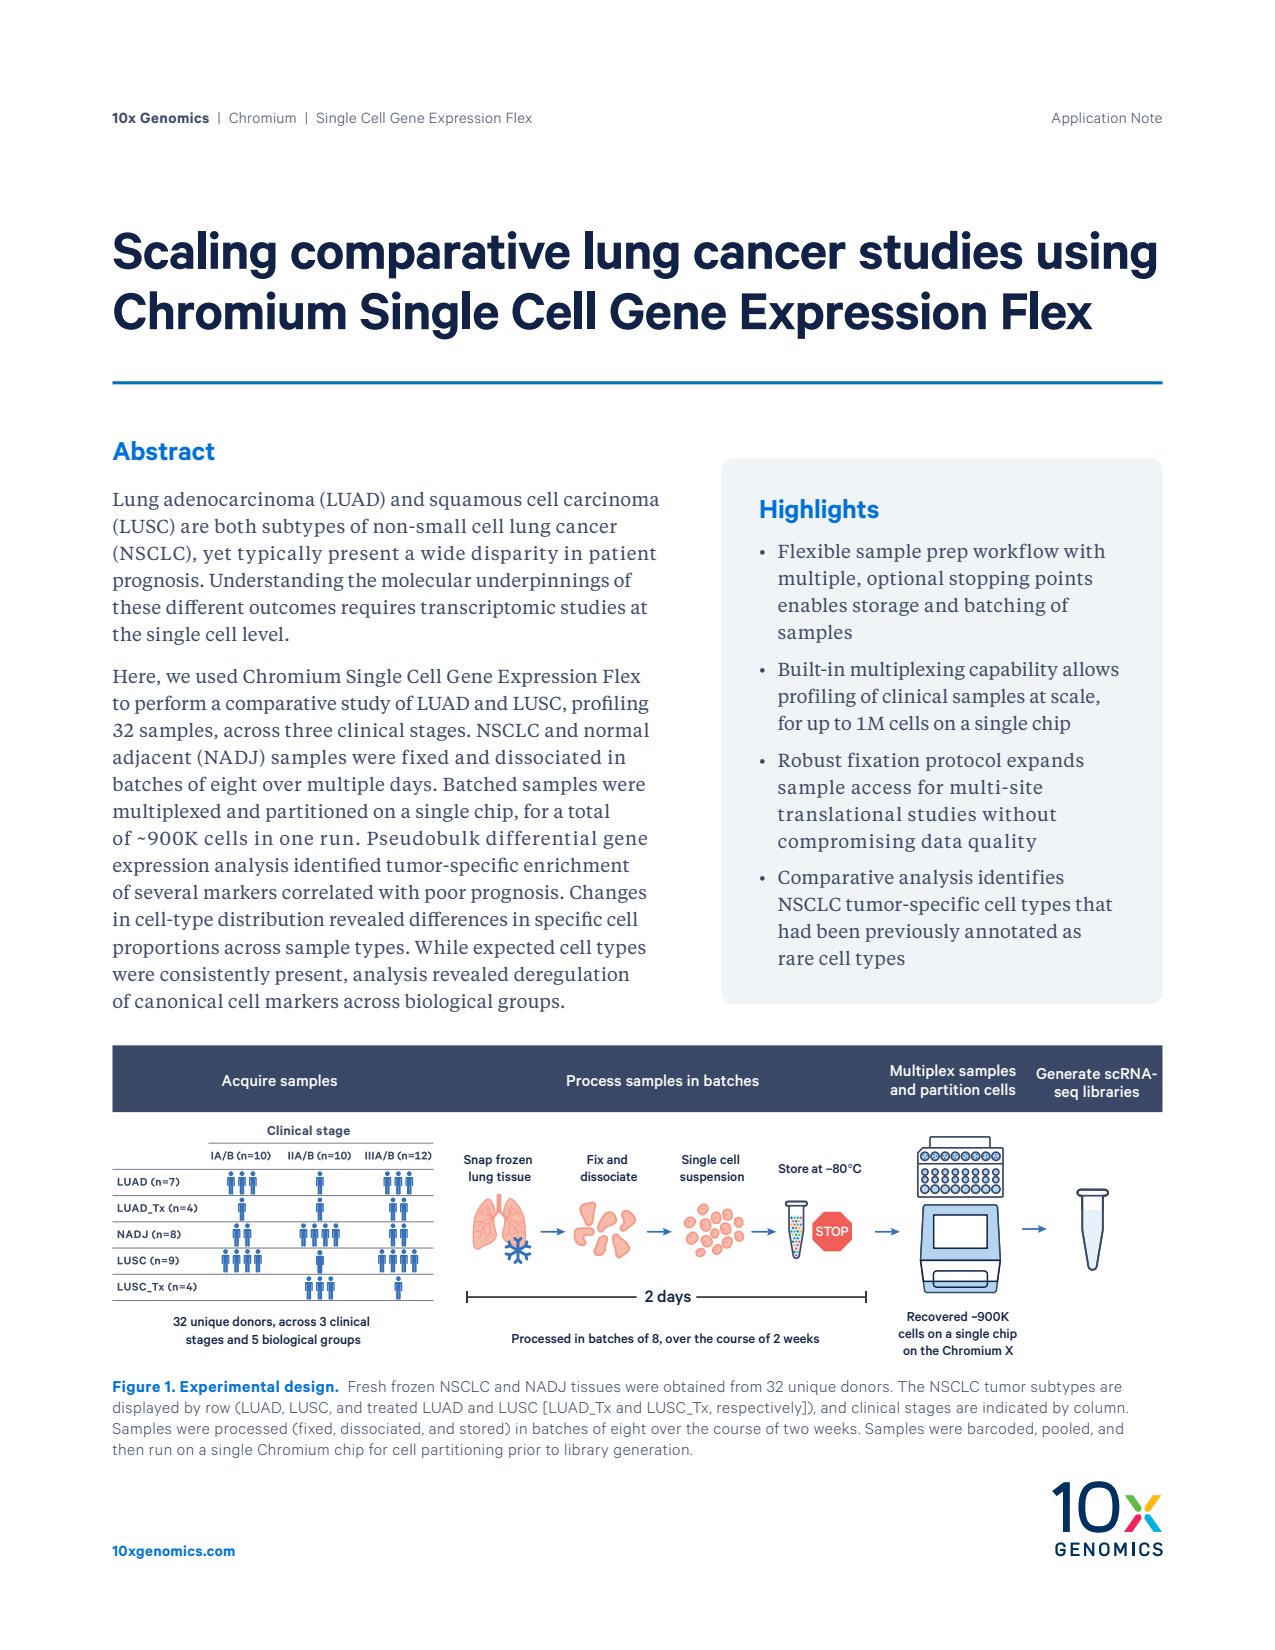 Scaling comparative lung cancer studies using Chromium Single Cell Gene Expression Flex